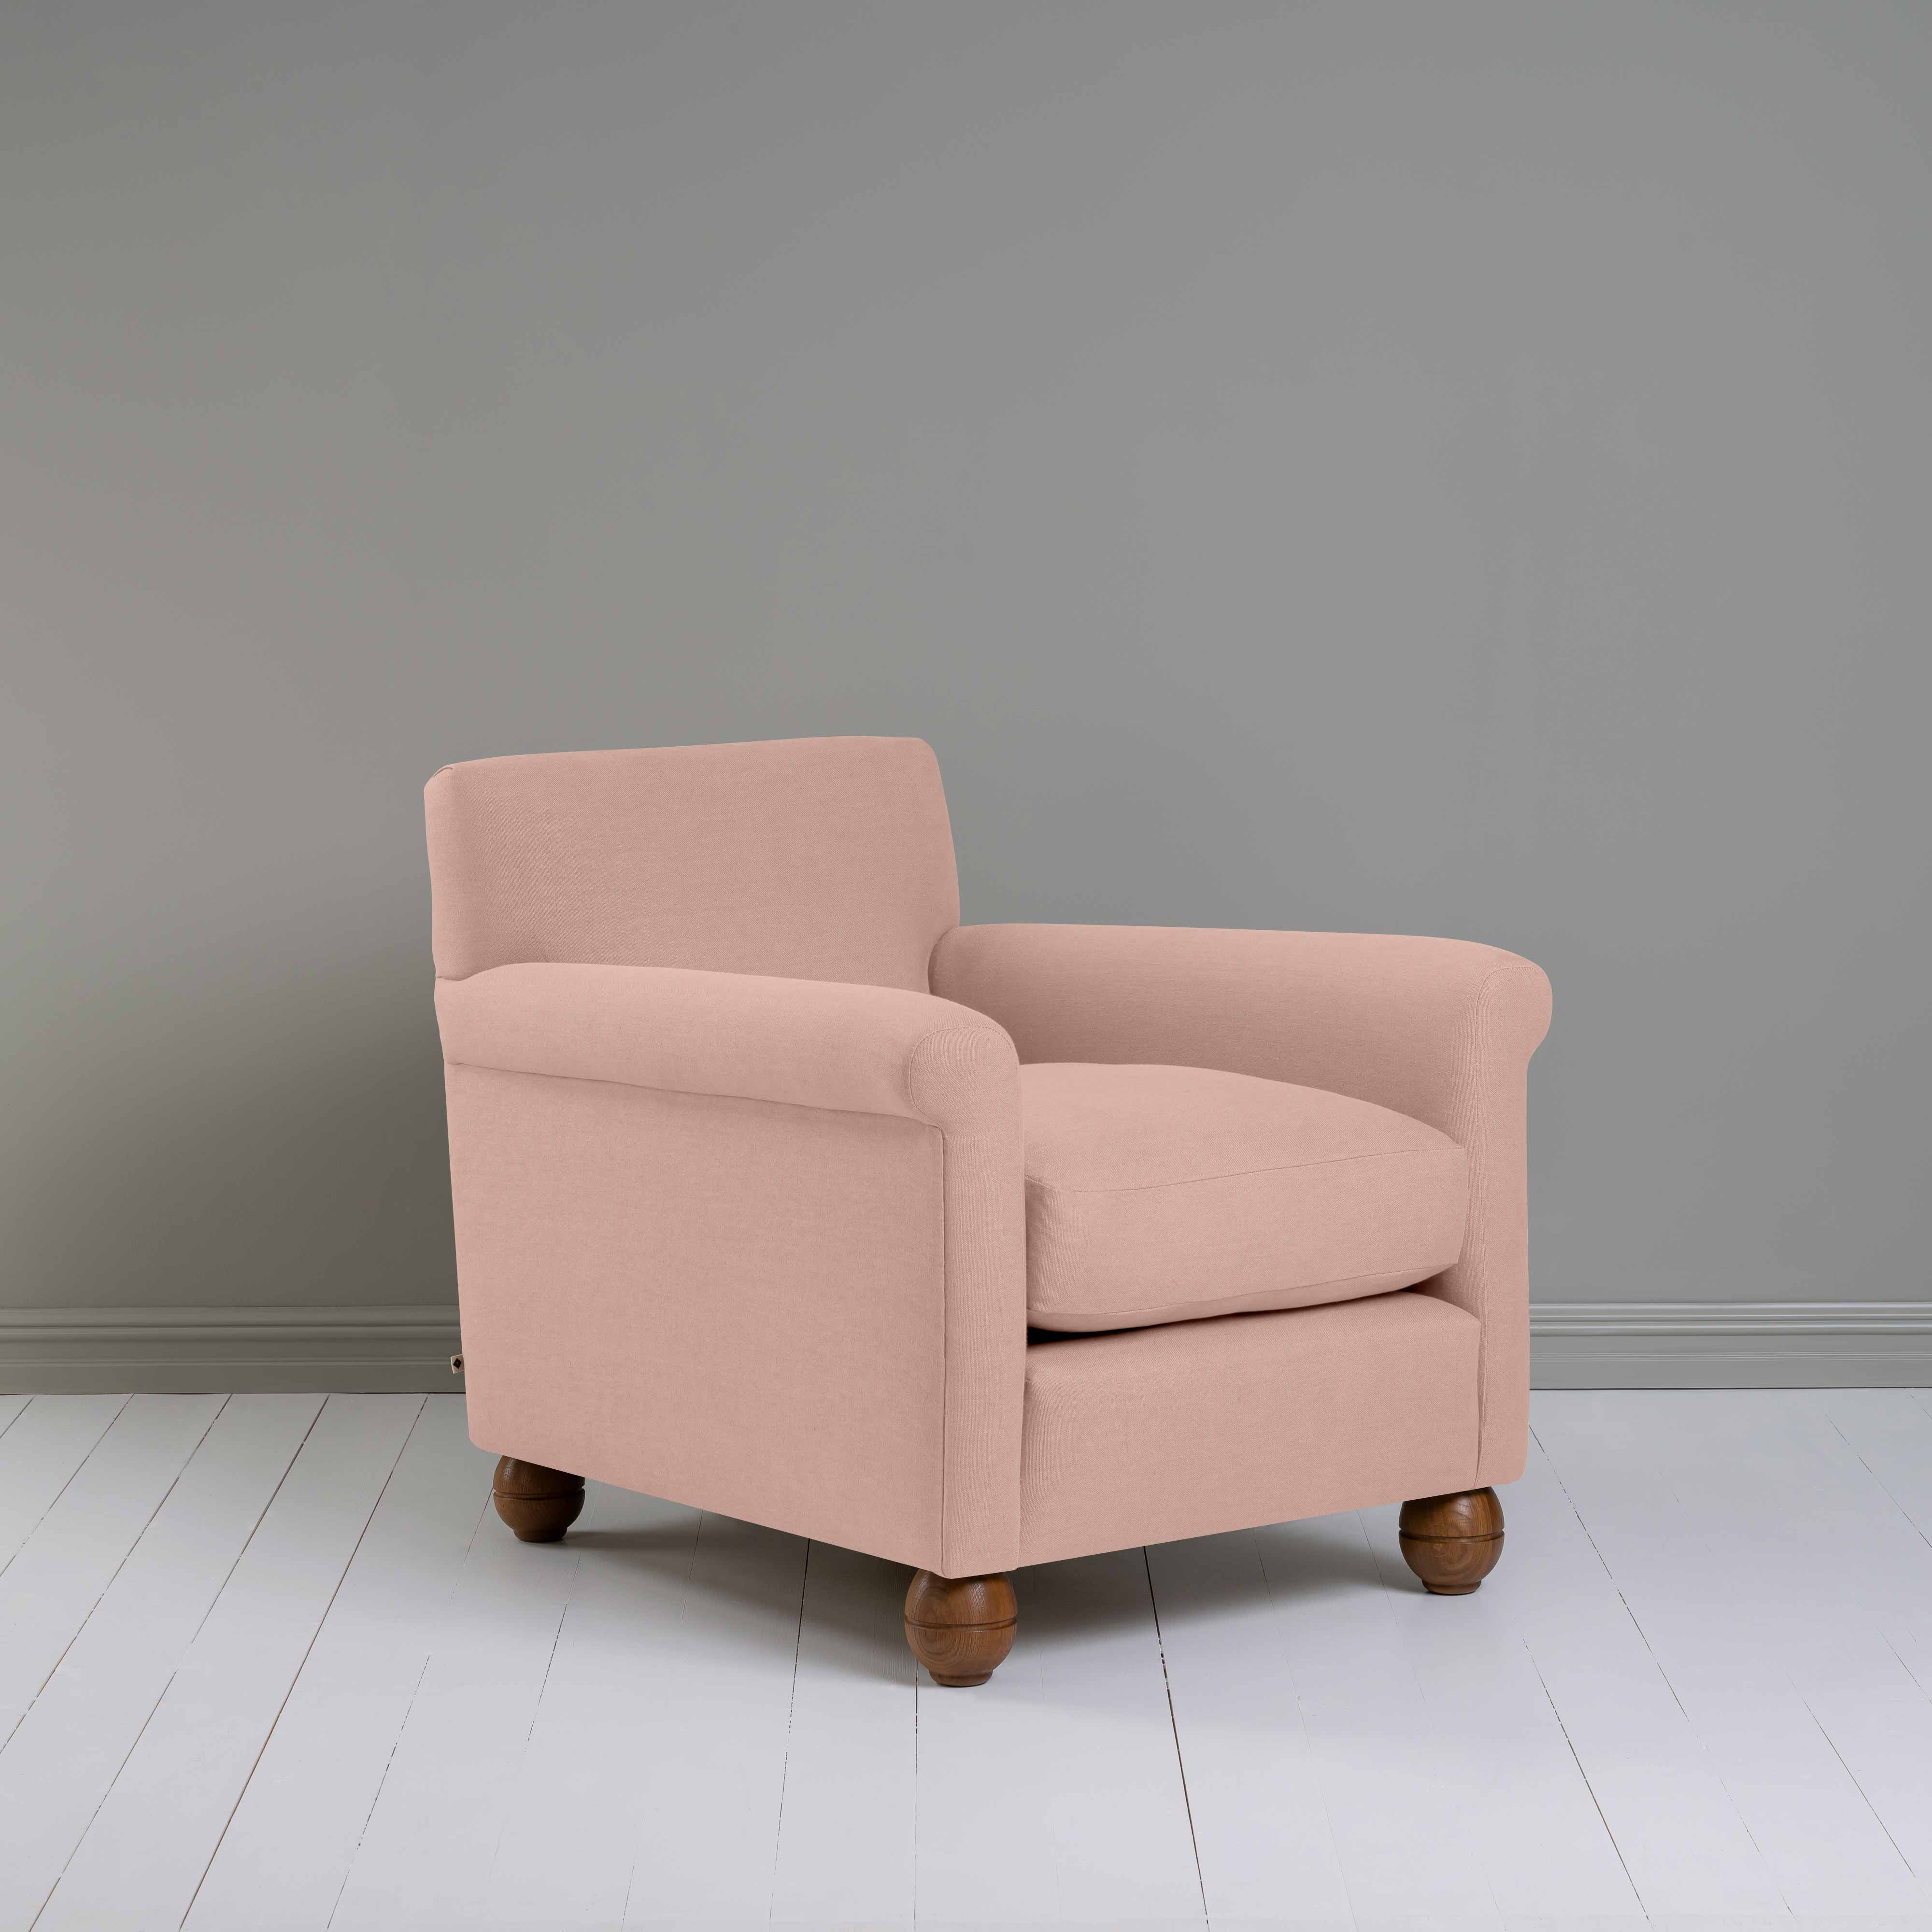  Idler Armchair in Laidback Linen Dusky Pink 